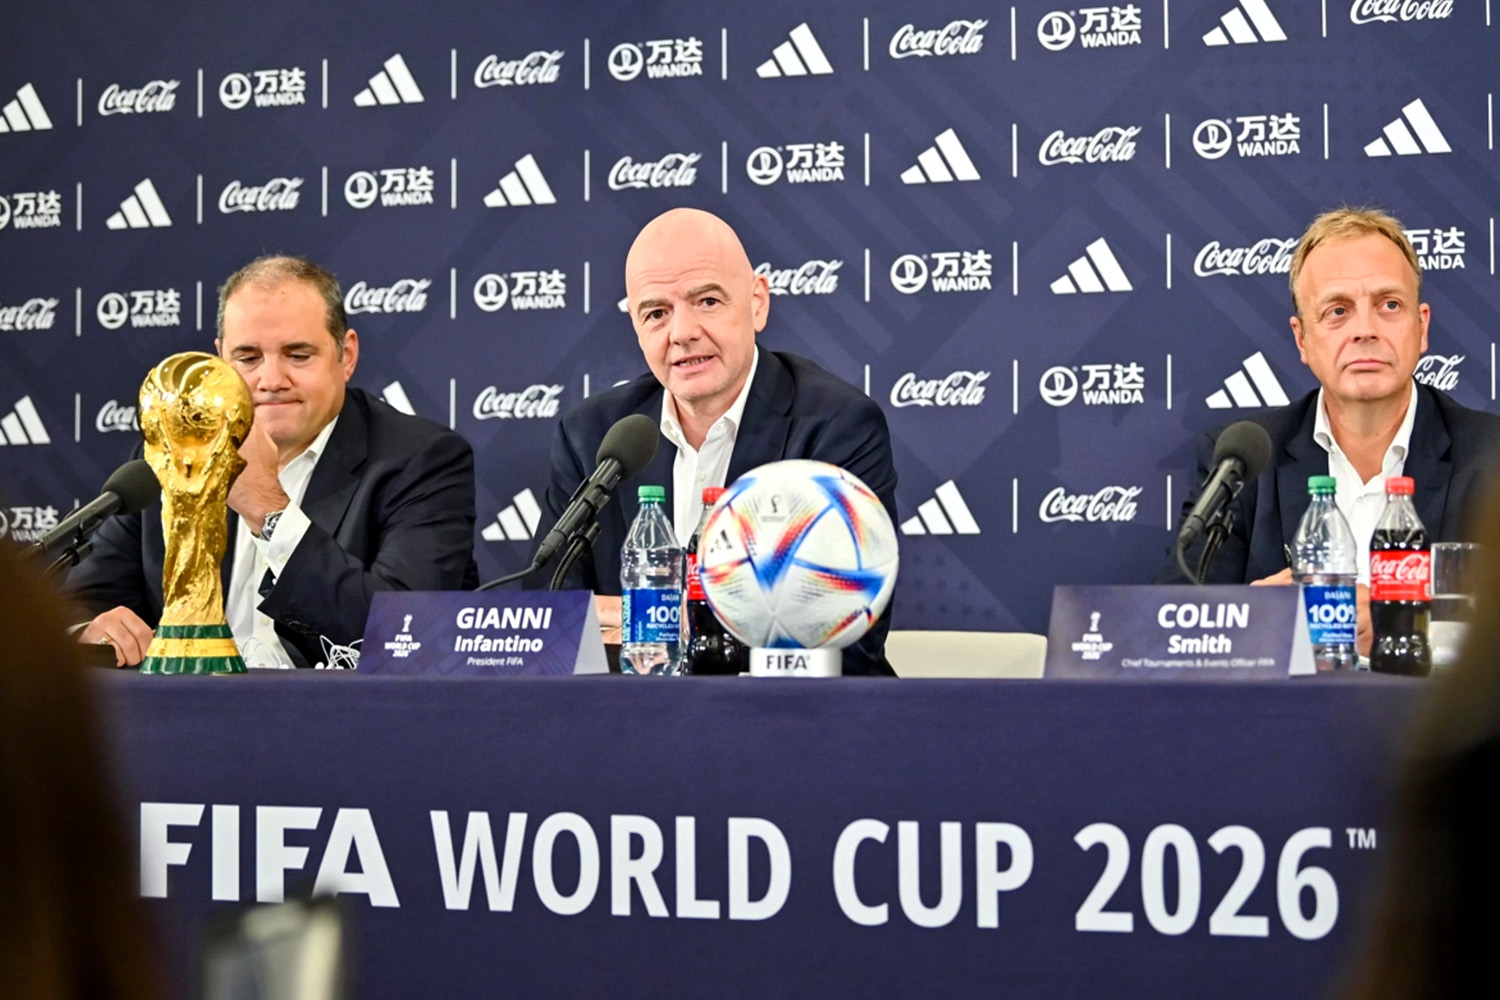 FIFA reserves at $4 billion after World Cup success; more to come